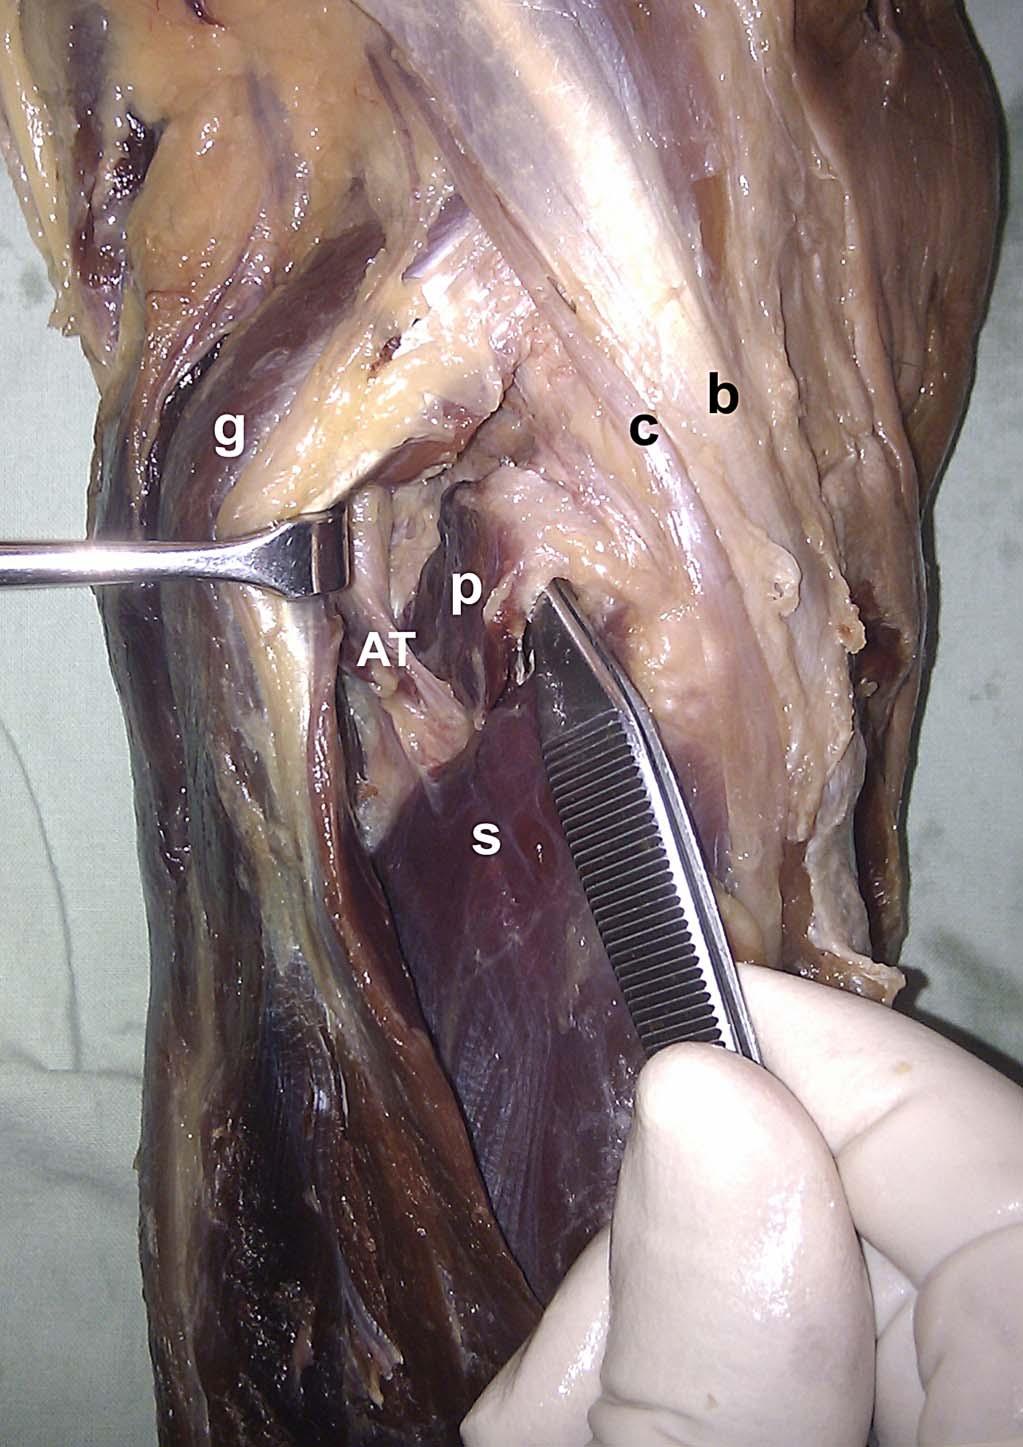 This brought the tendon of popliteus muscle (p), the belly of soleus muscle, and anterior tibial (AT) artery into view. Biceps femoris muscle (b) and common peroneal nerve (c). a computed tomography.